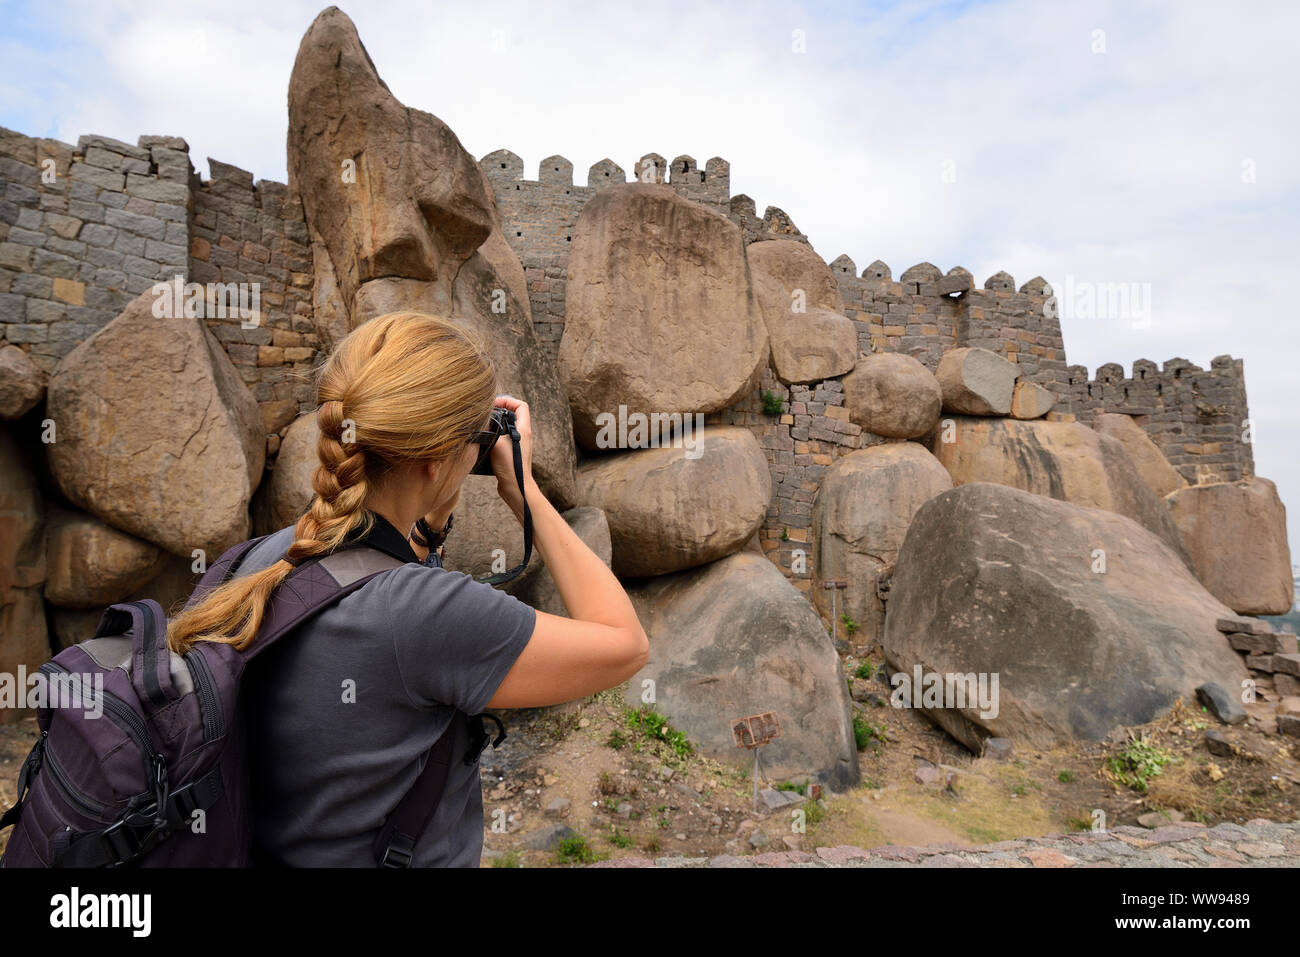 Tourist from Europe photographing Golconda Fort, also known as Golkonda or Golla Konda is a fortified citadel located in Hyderabad, India Stock Photo